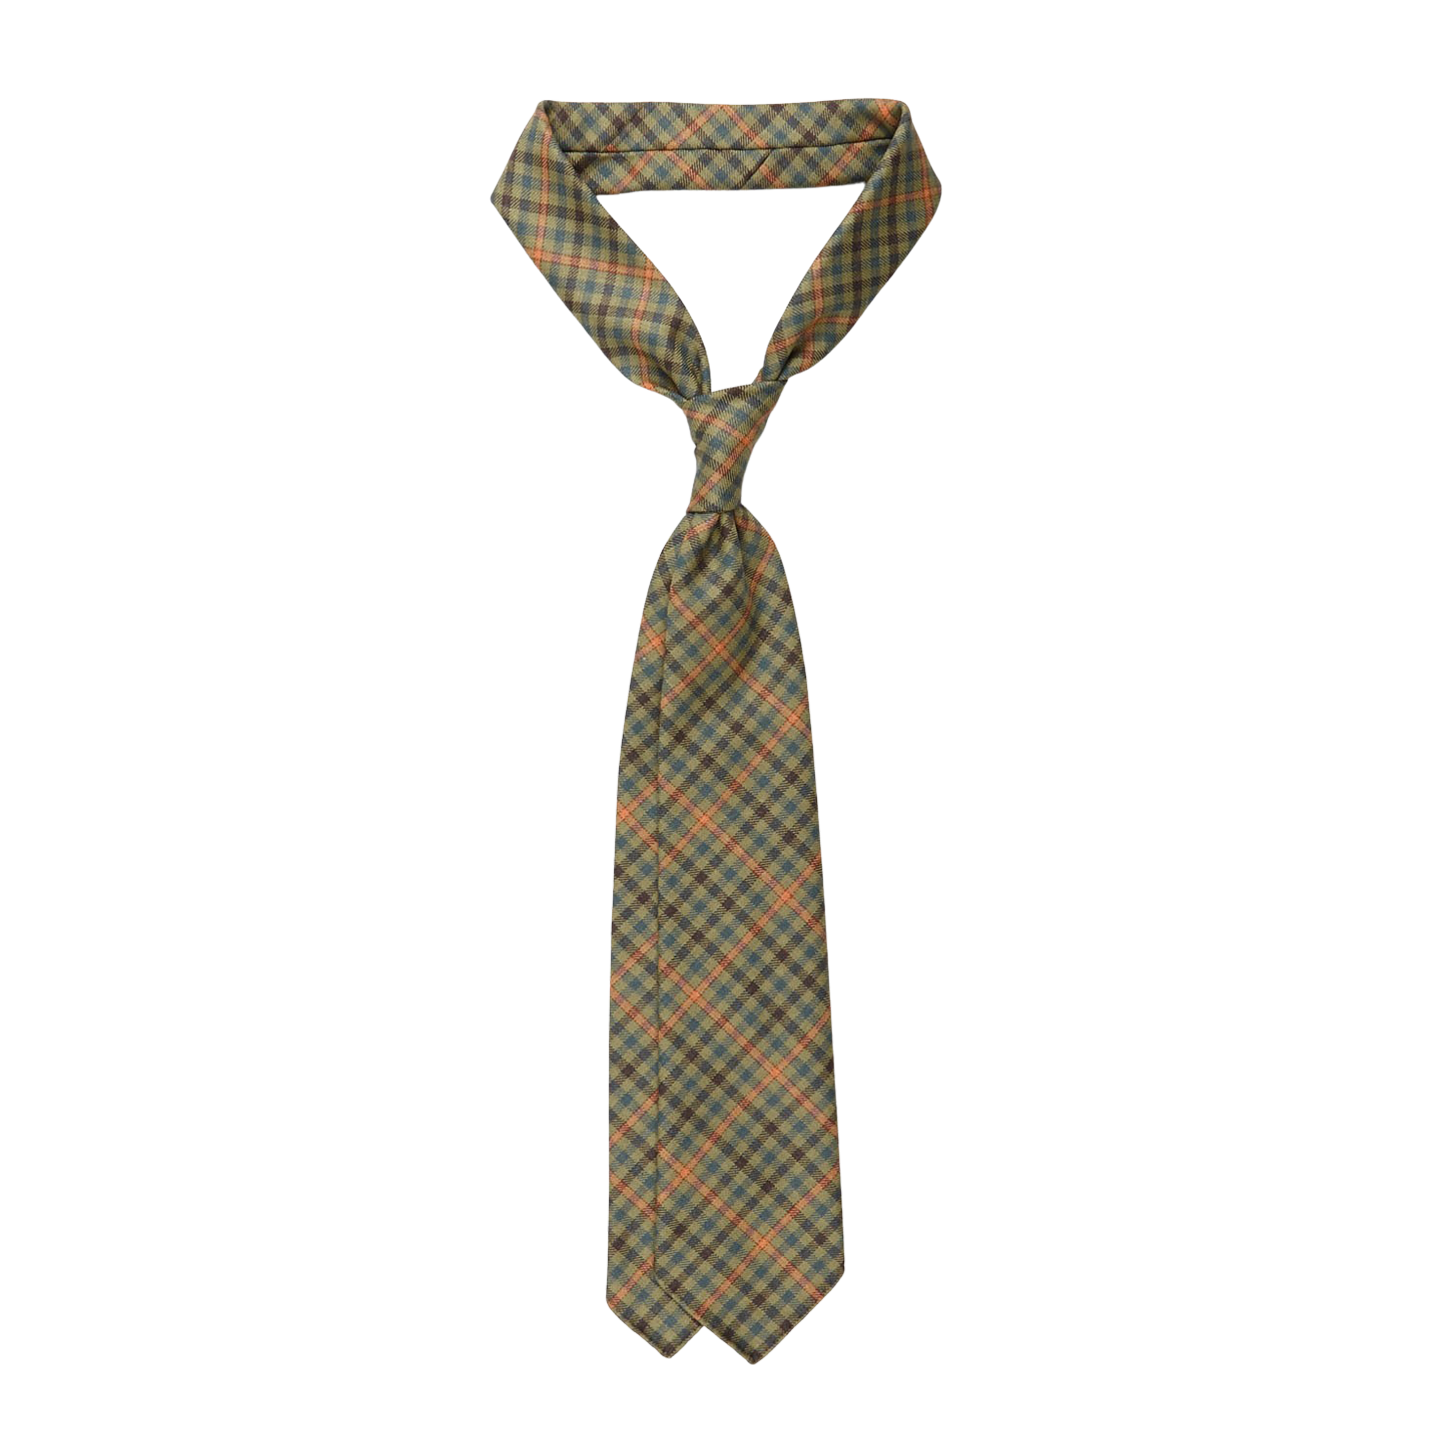 Dreaming of Monday Green Guarded Gunclub Checked 7-Fold Wool Tie Feature